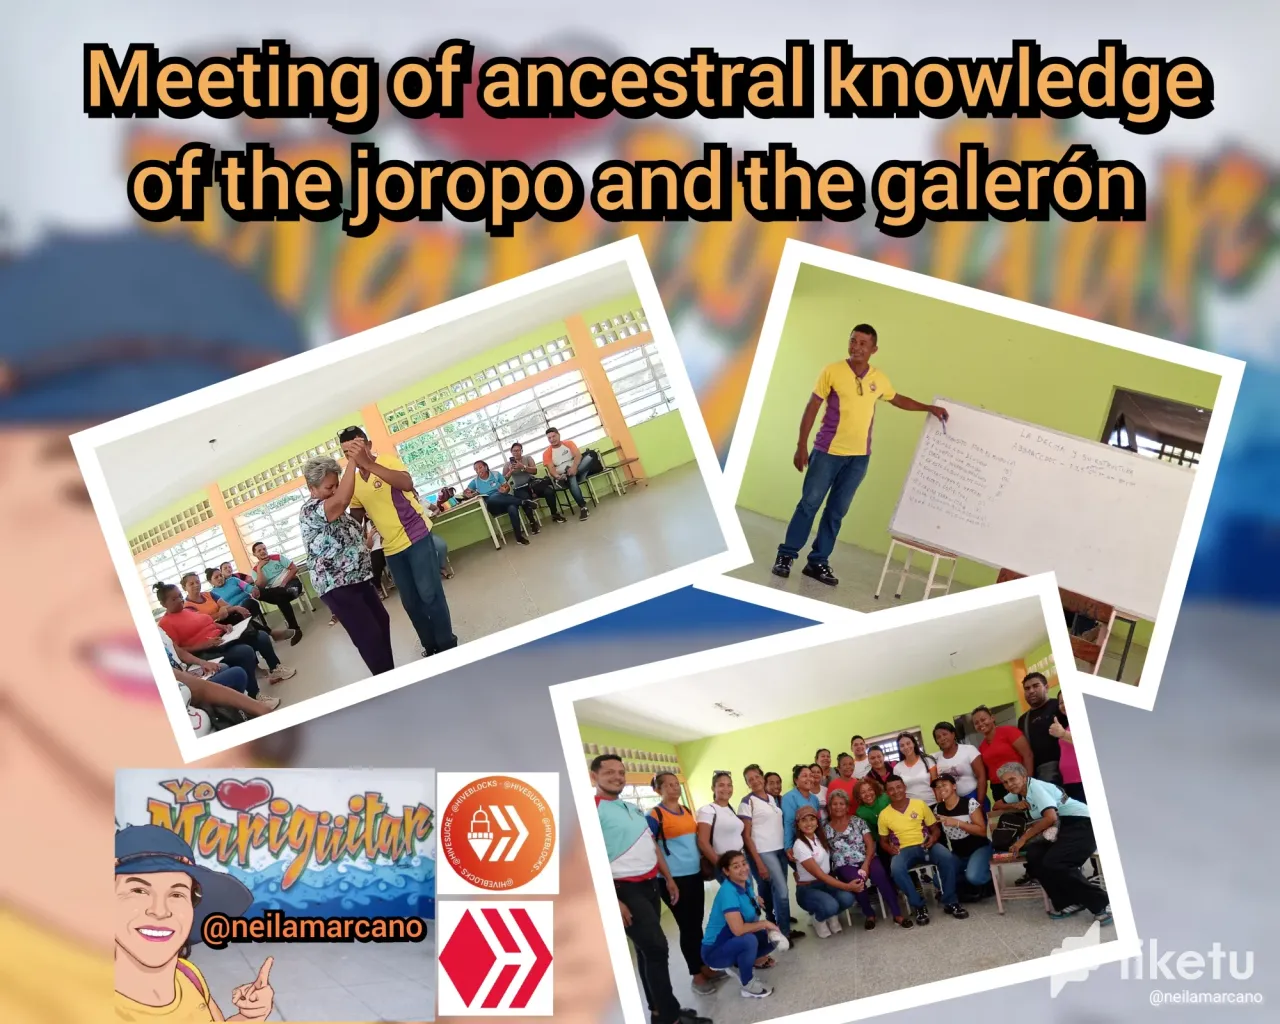 Meeting of ancestral knowledge of the joropo and the galerón [🇺🇸/🇪🇸]